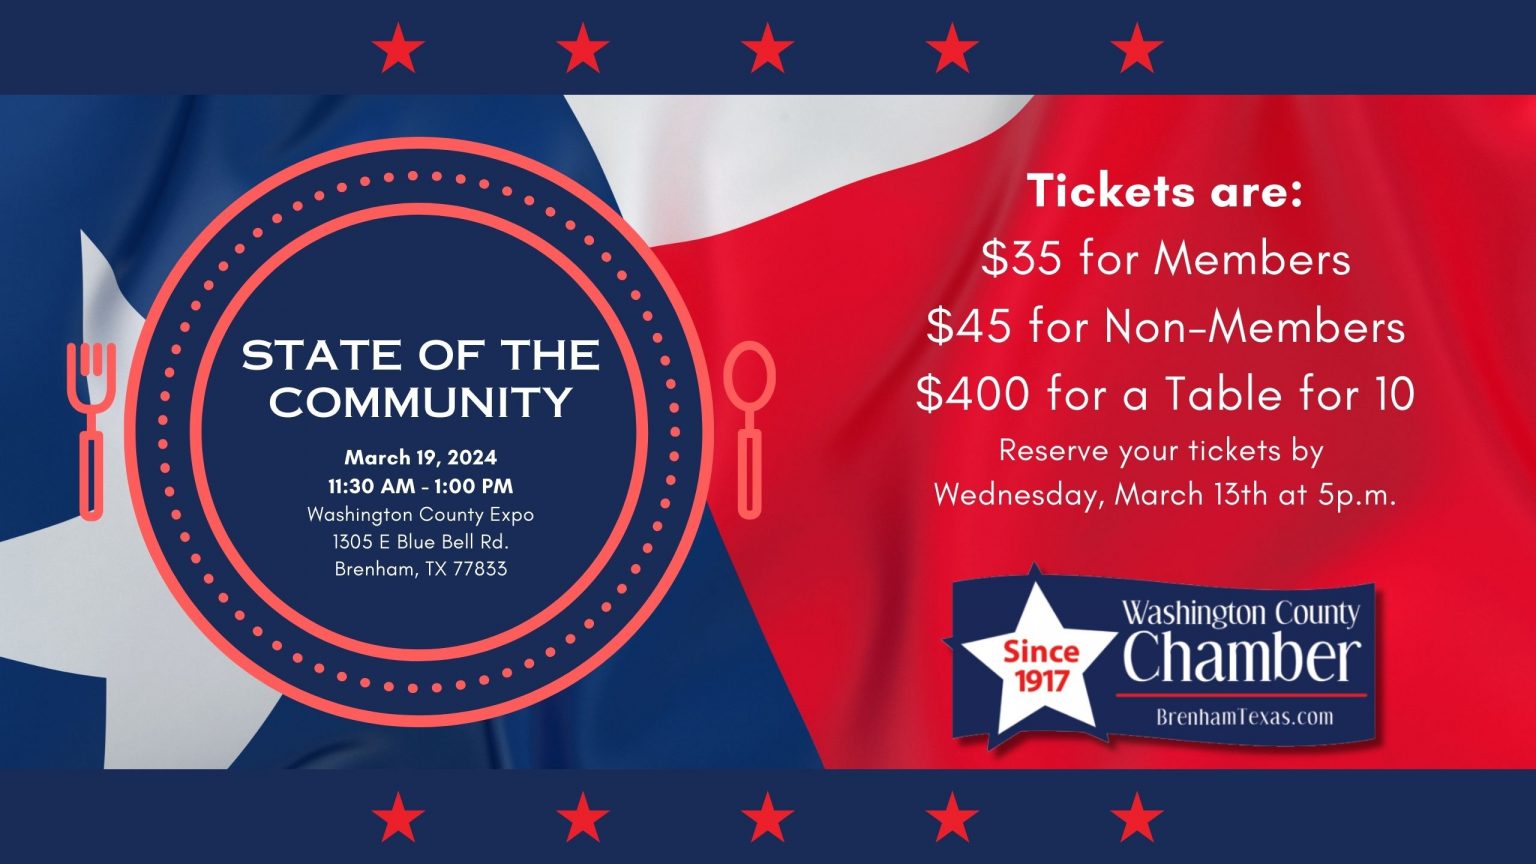 State of the Community Luncheon, March 19, 2024 Washington County Expo